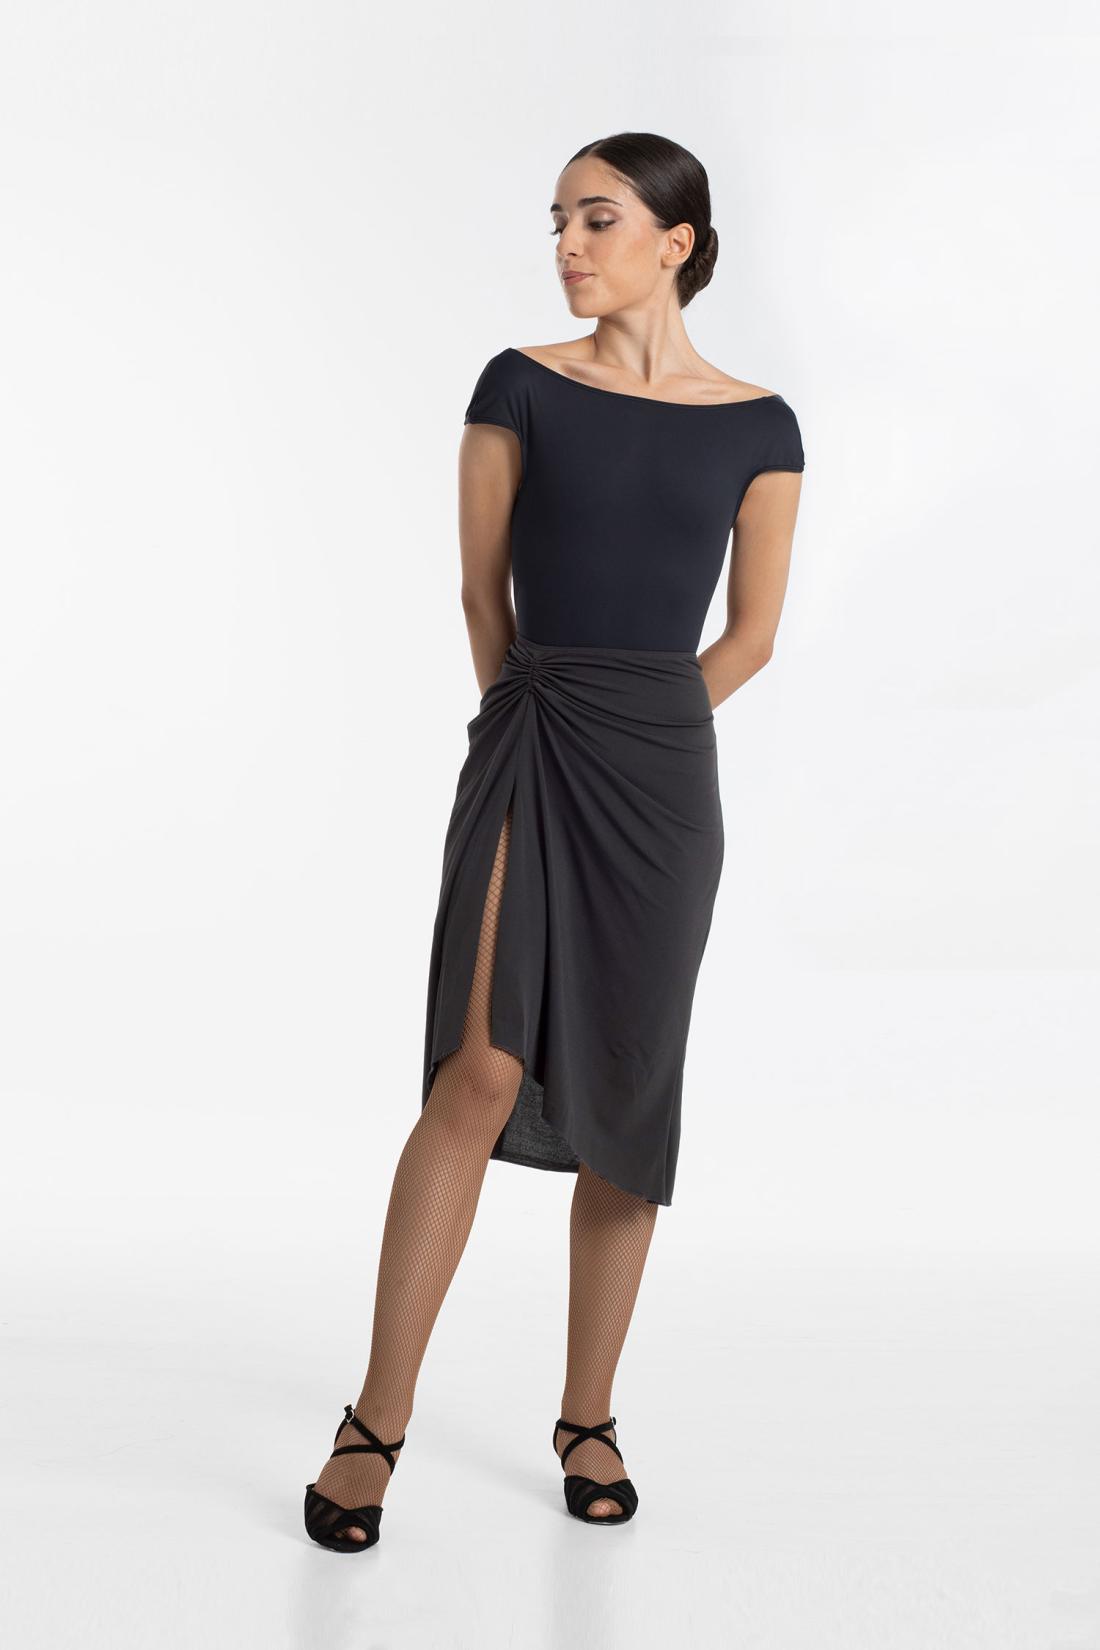 Intermezzo Ballroom Skirt with leg-baring side slit and adjustable ruched